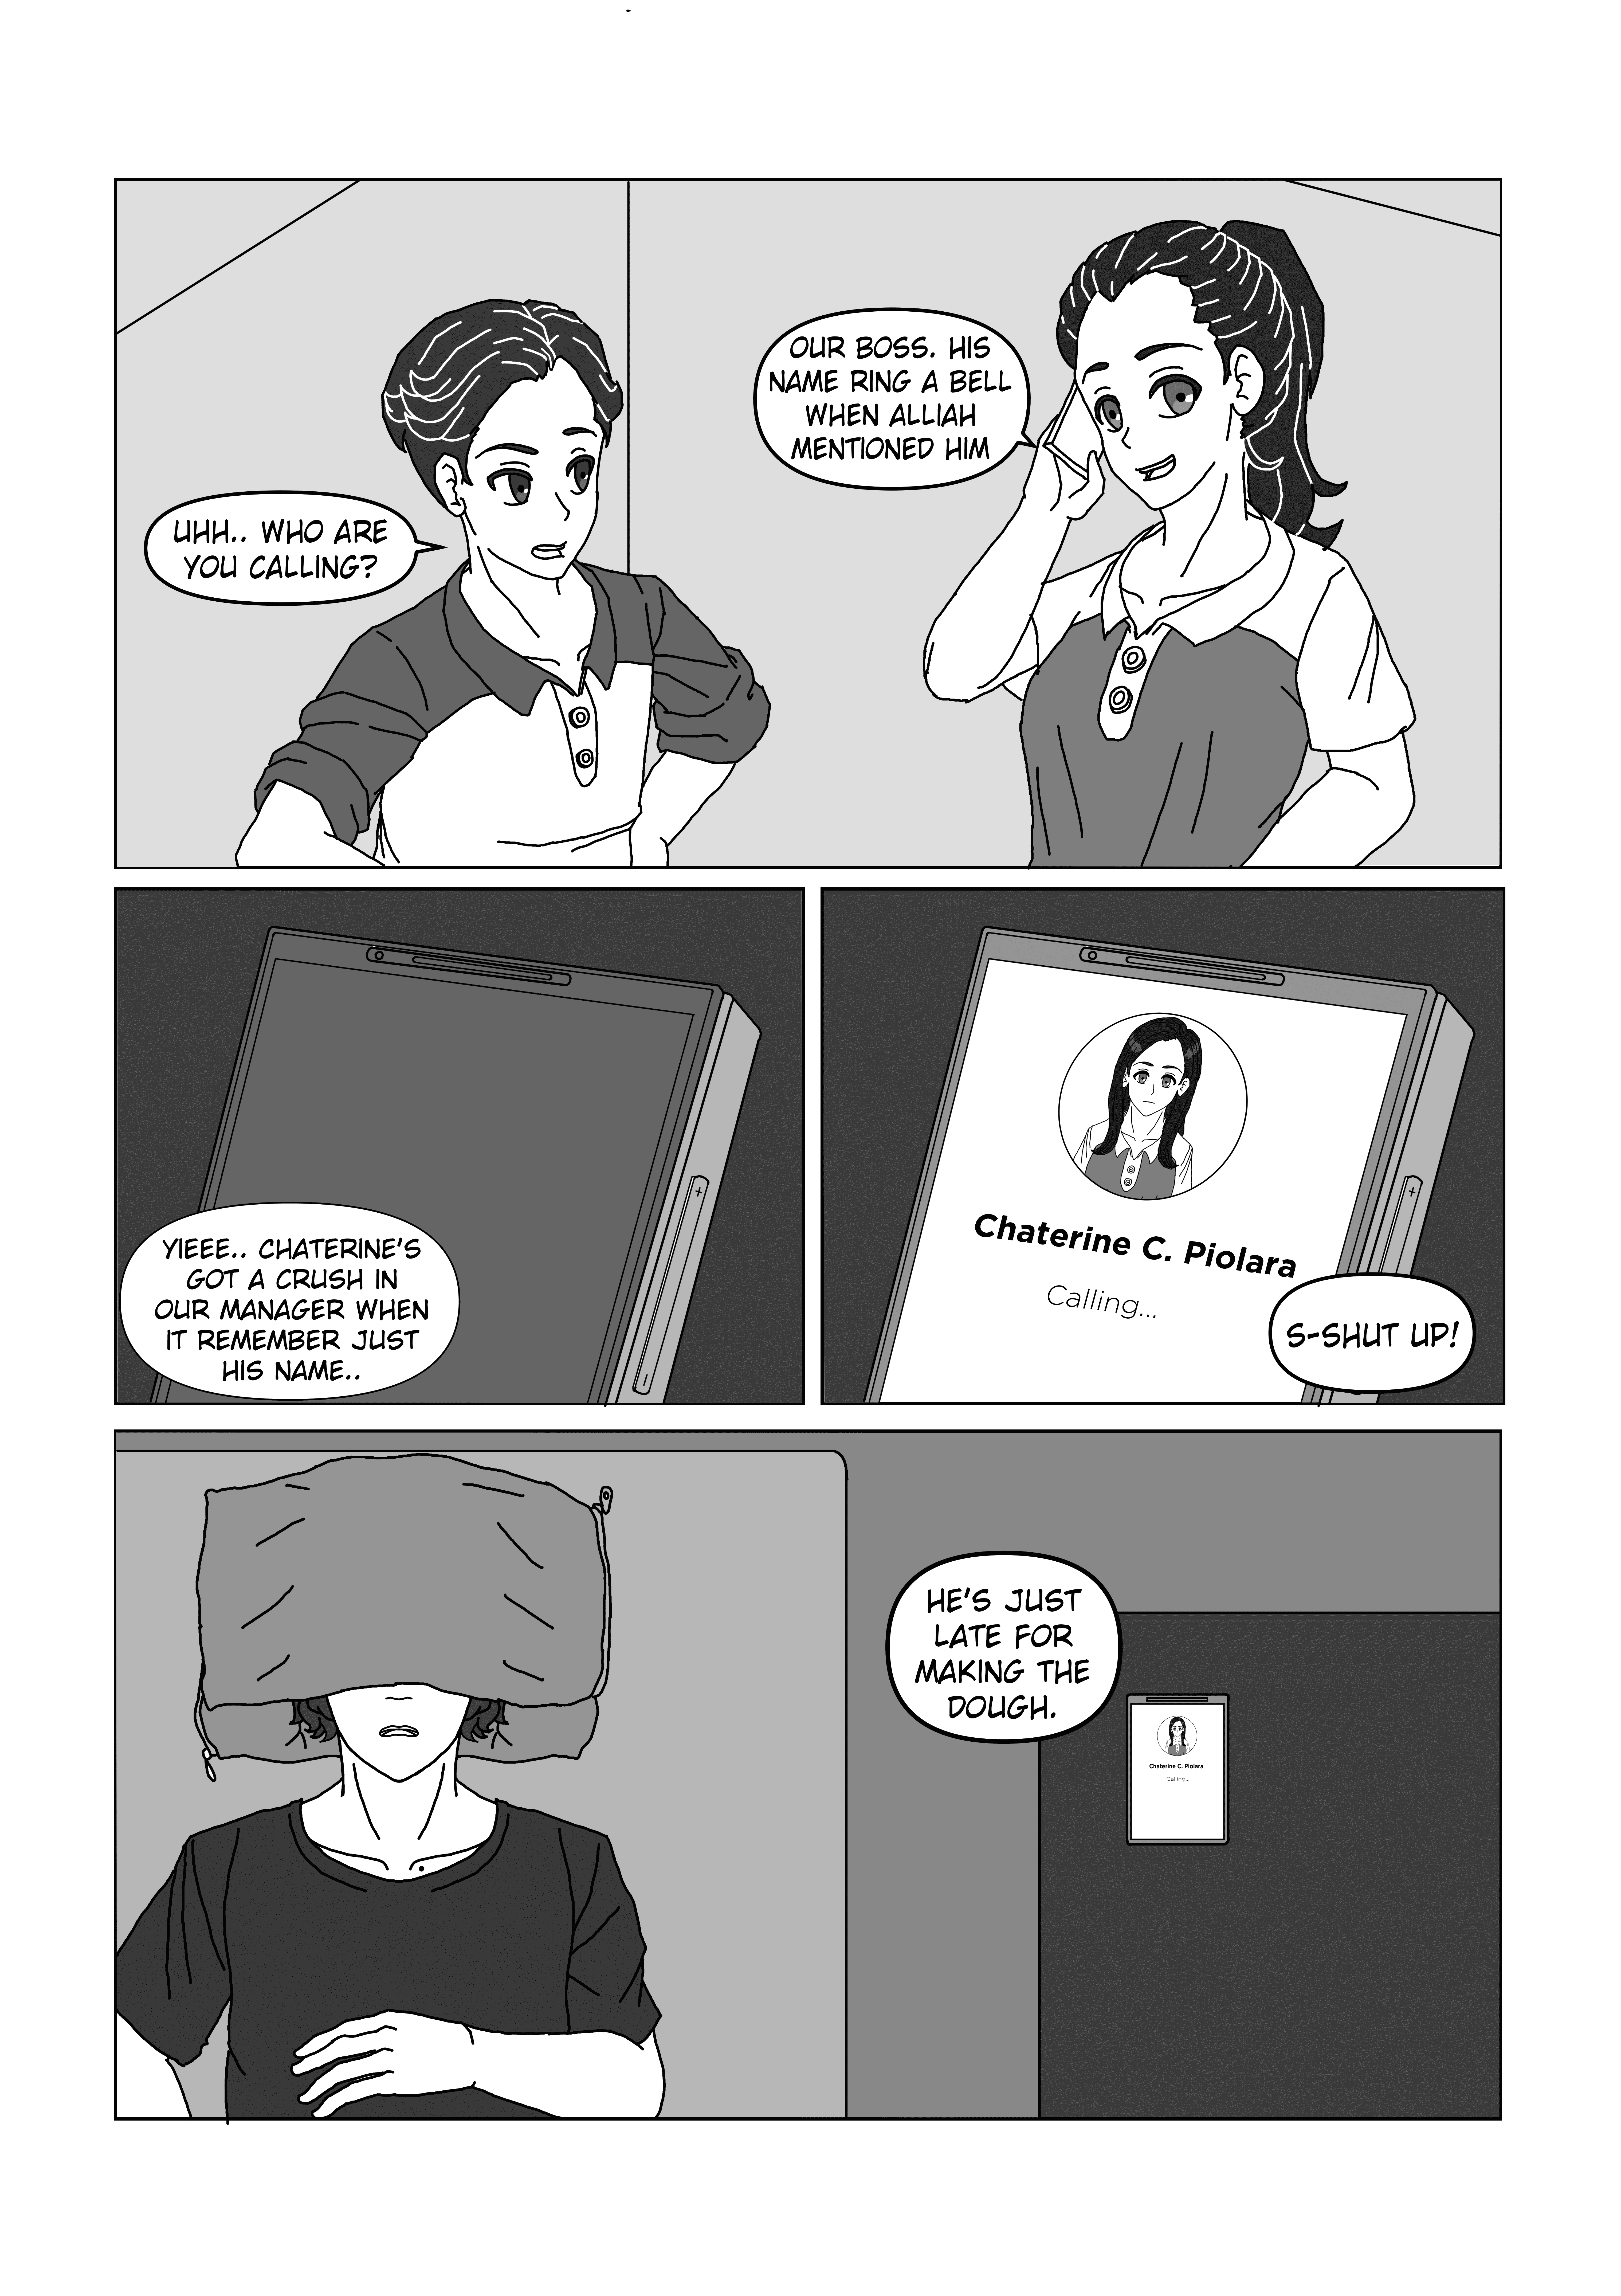 Daily Lives In Other World - Breadwinner Page 5 